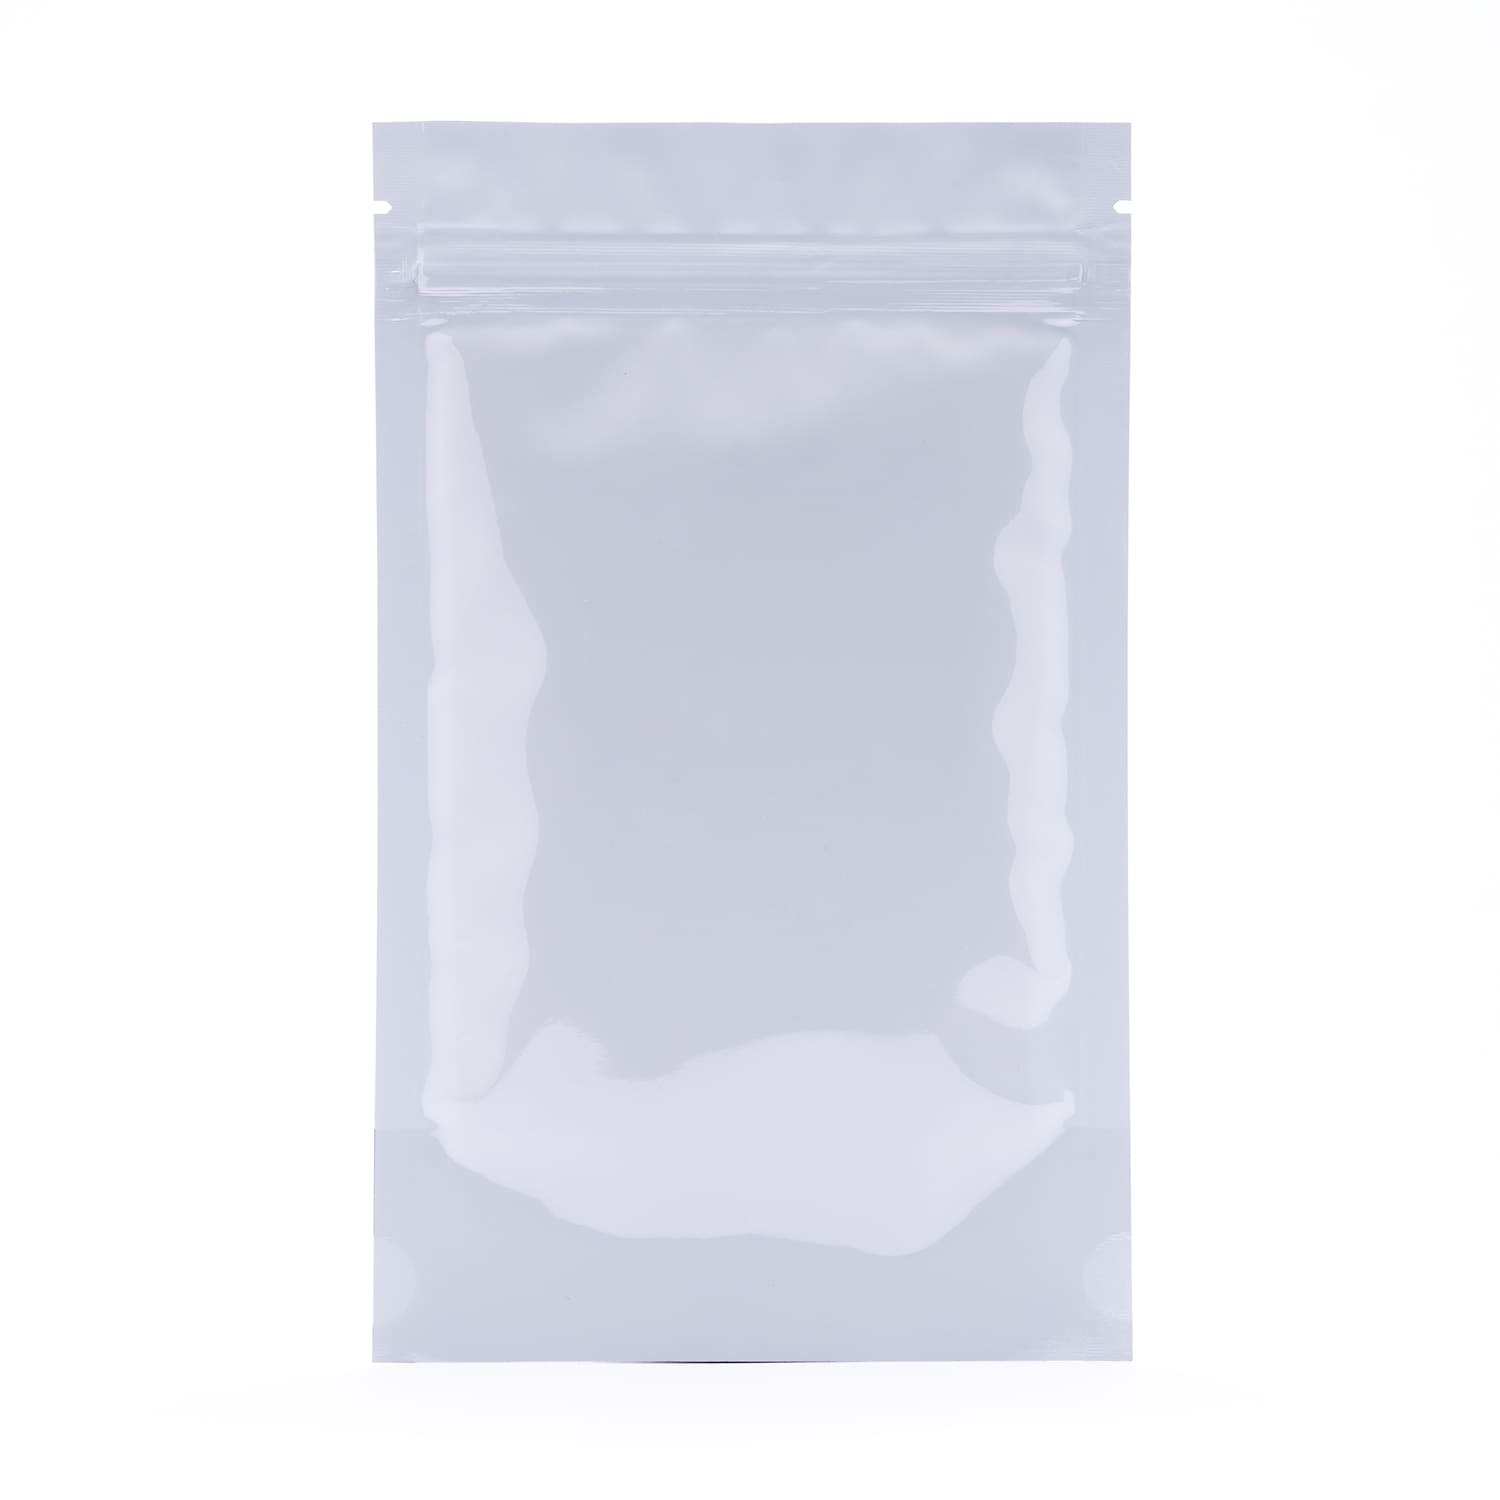 Ounce Mylar Barrier Bags White/Clear - 28 Grams (100 Count) - SupplyCo